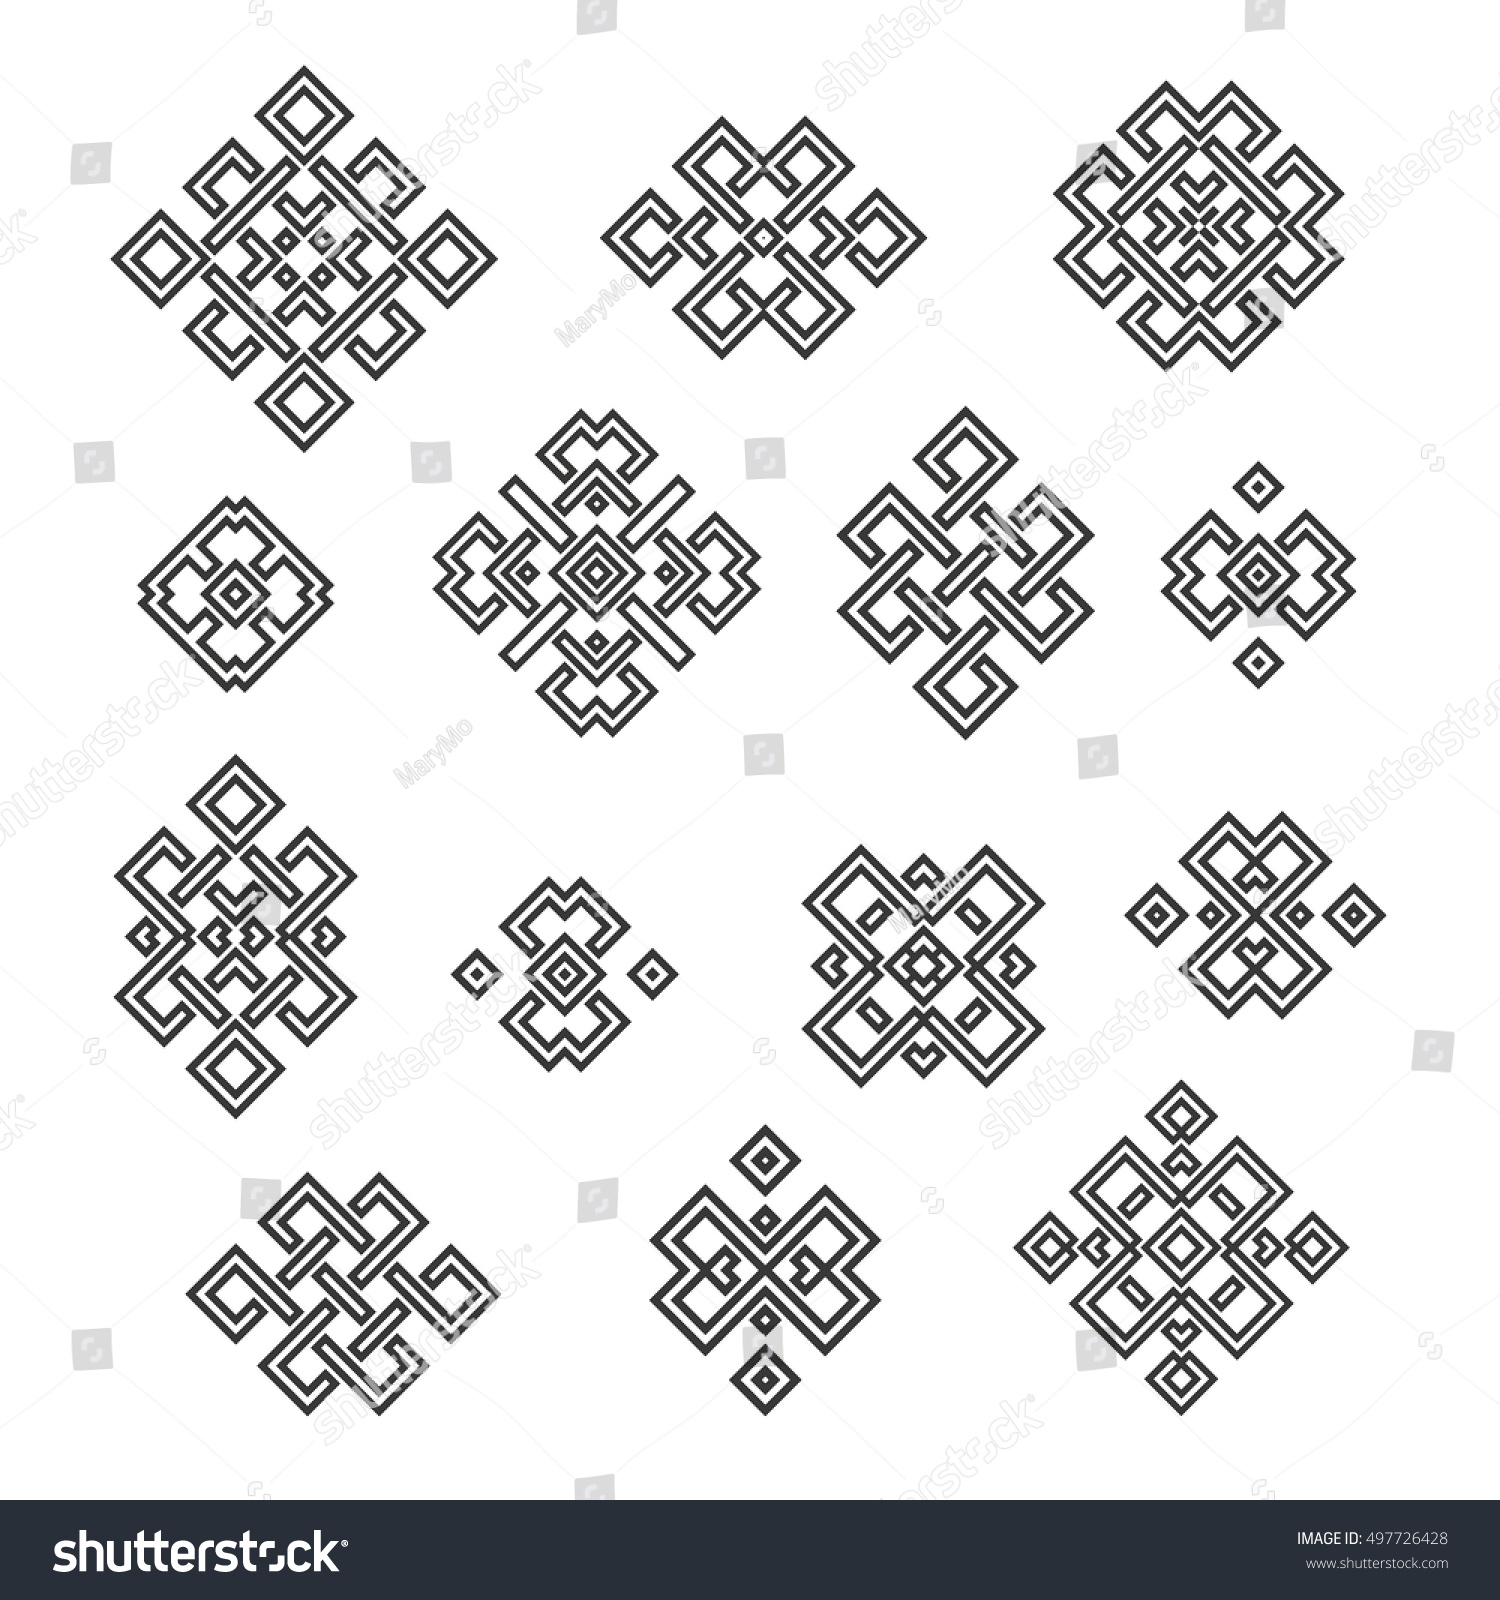 Set Collection Endless Knot Eternal Knot Stock Vector (Royalty Free ...